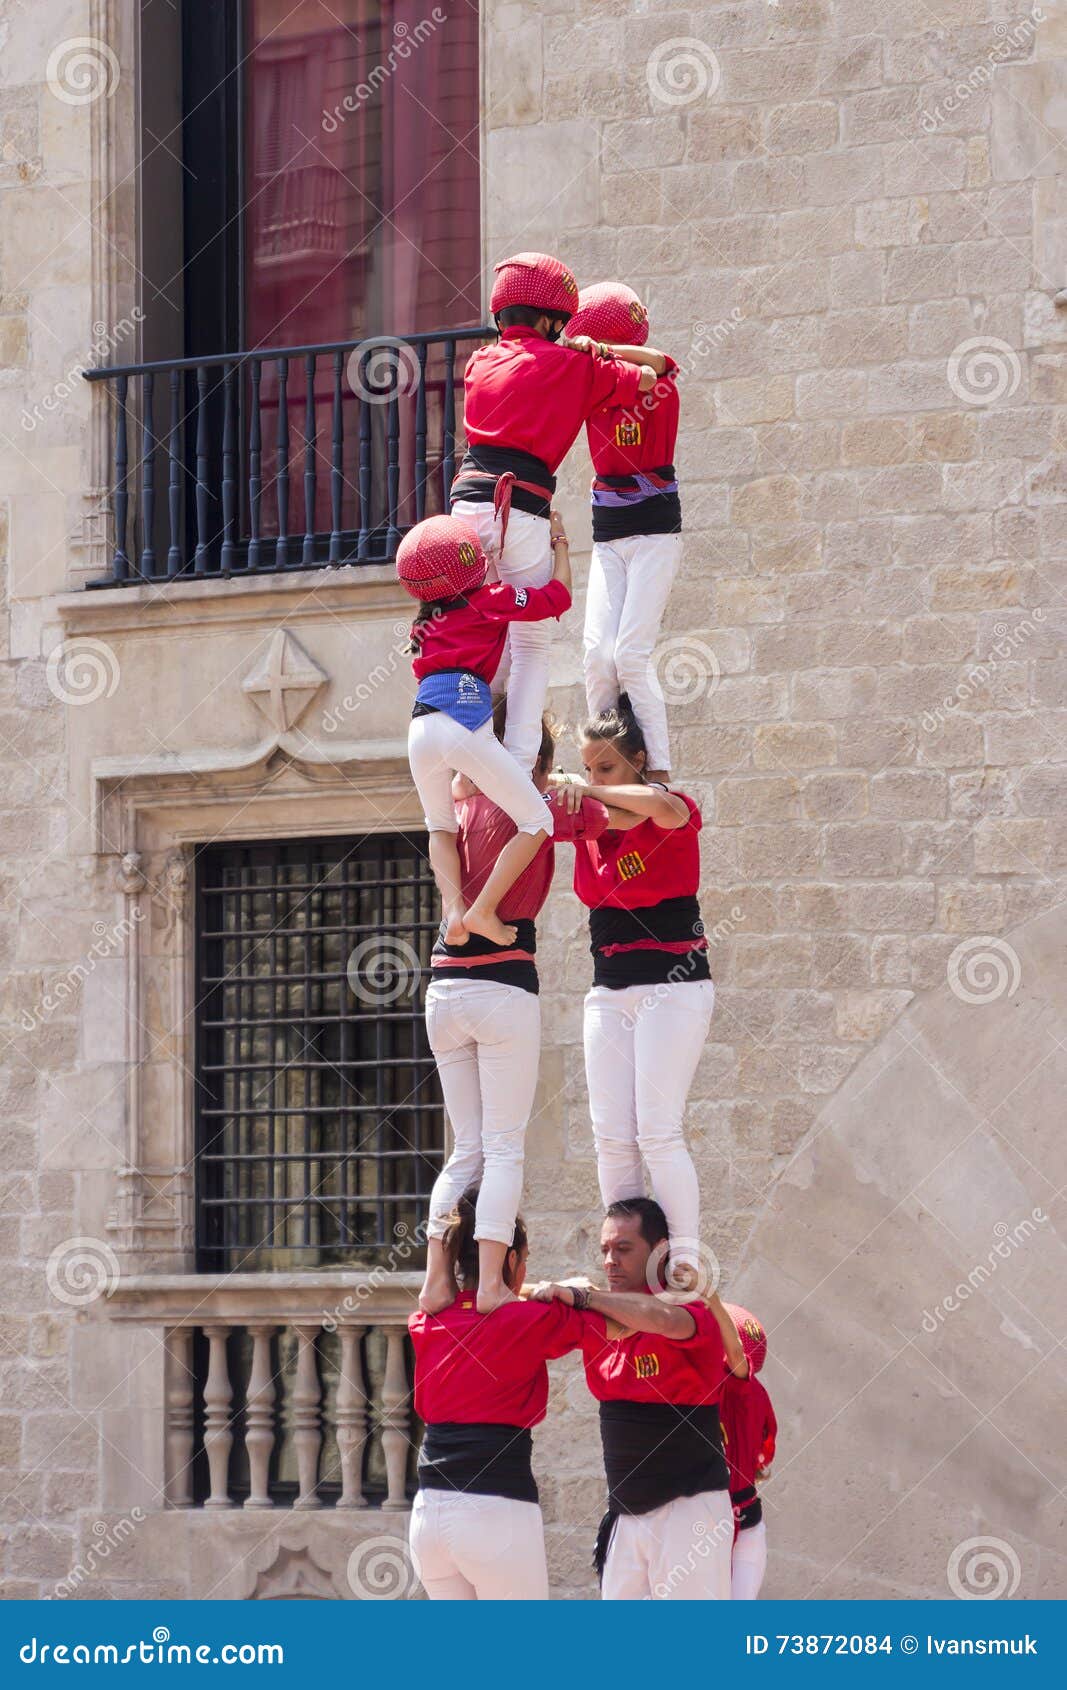 Castles Human Tower editorial stock image. Image of culture - 73872084